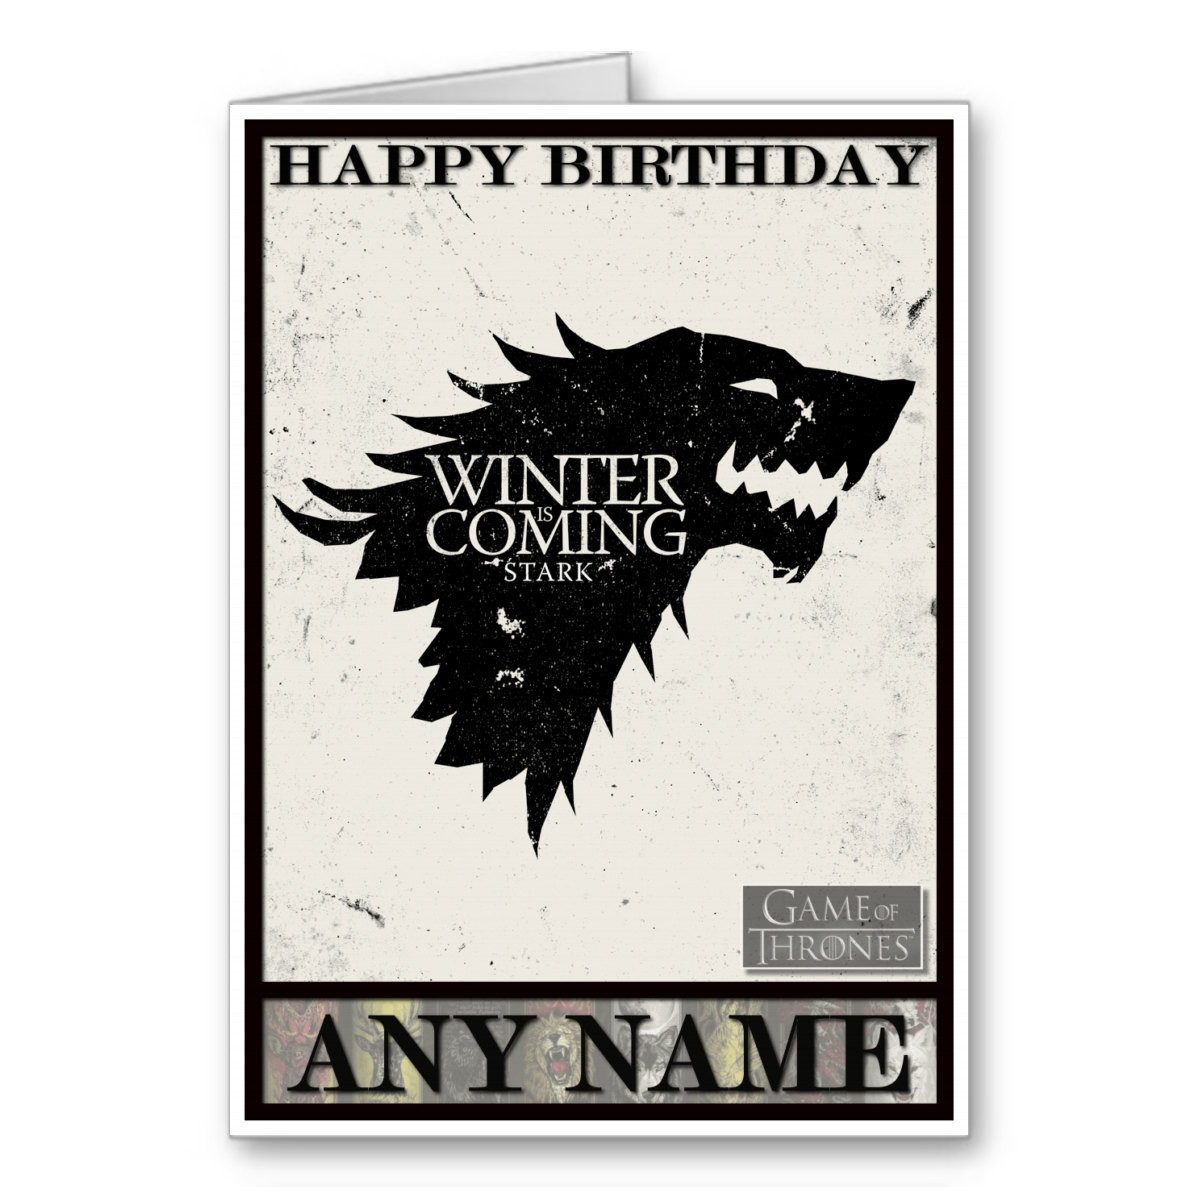 Game Of Thrones Birthday Card
 Chandeliers & Pendant Lights